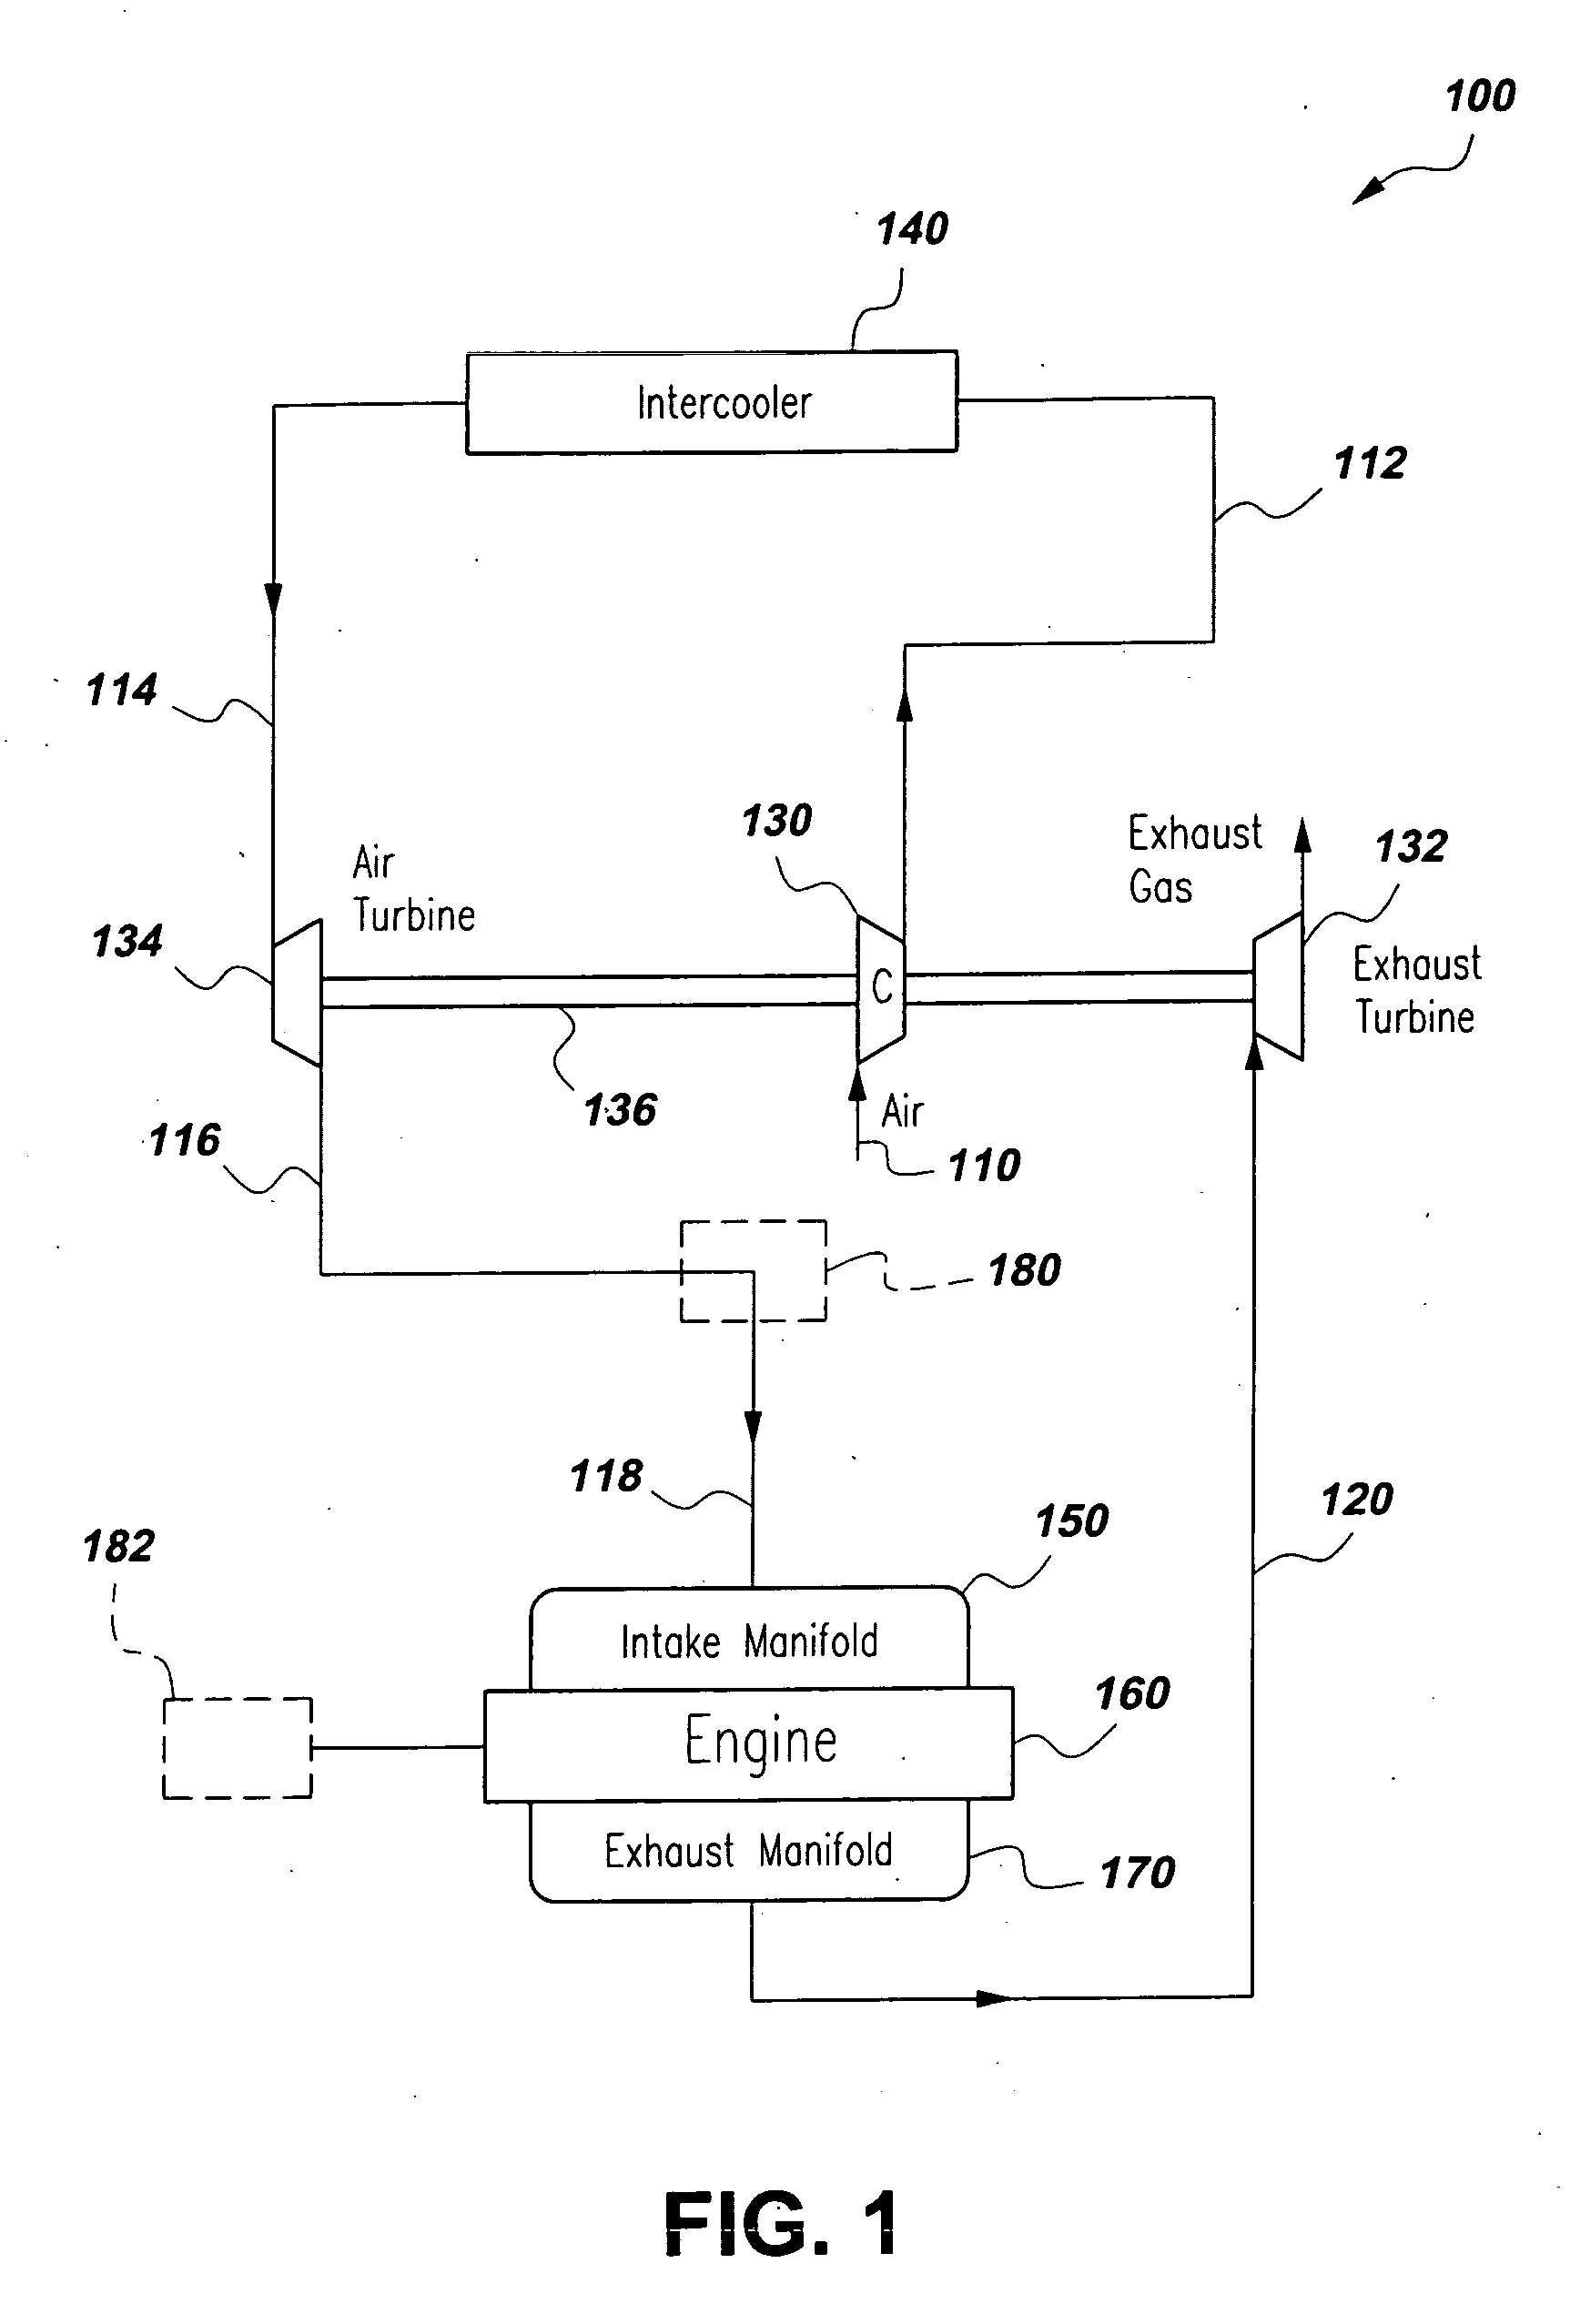 Turbocharged intercooled engine utilizing the turbo-cool principle and method for operating the same